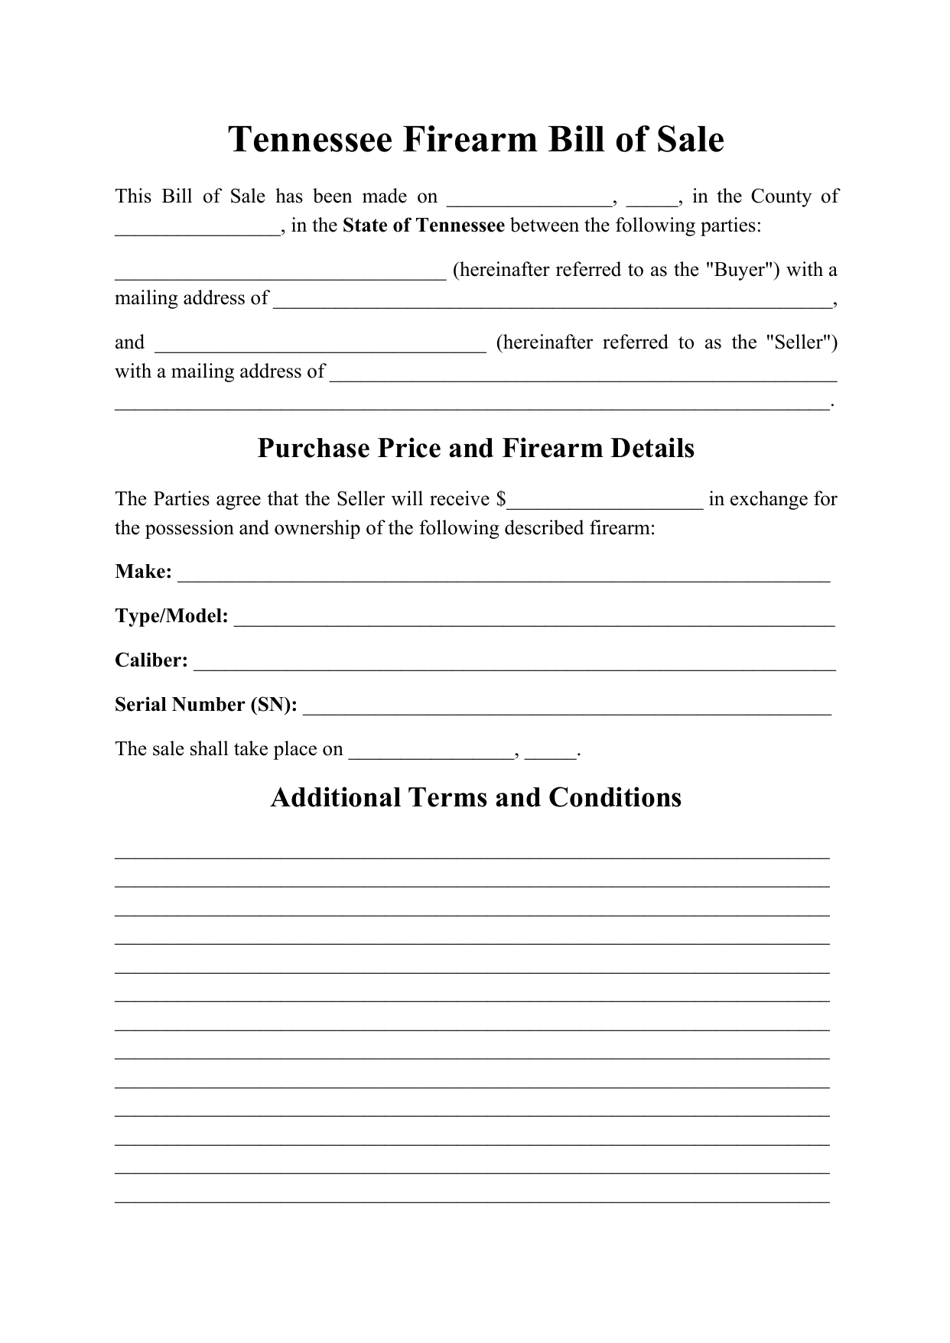 Tennessee Firearm Bill of Sale Form Fill Out Sign Online and